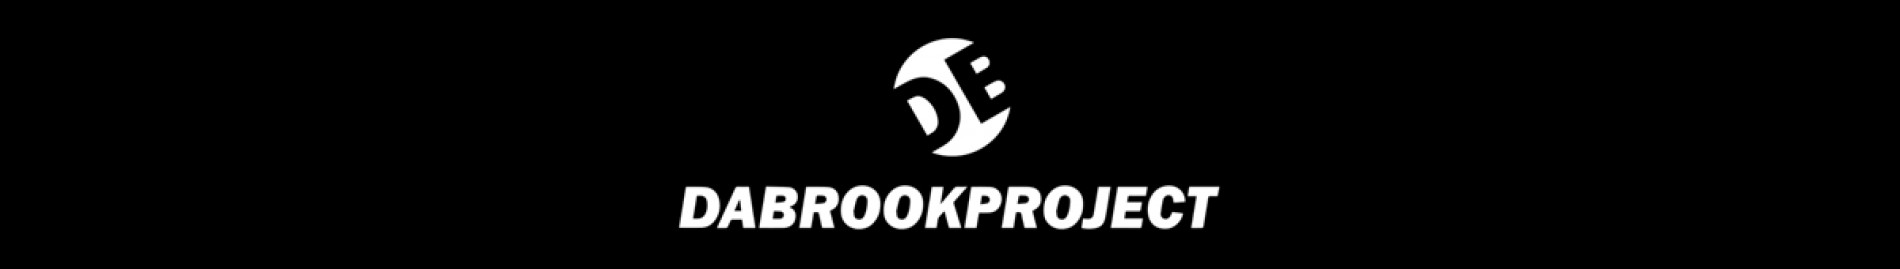 DABROOK PROJECT